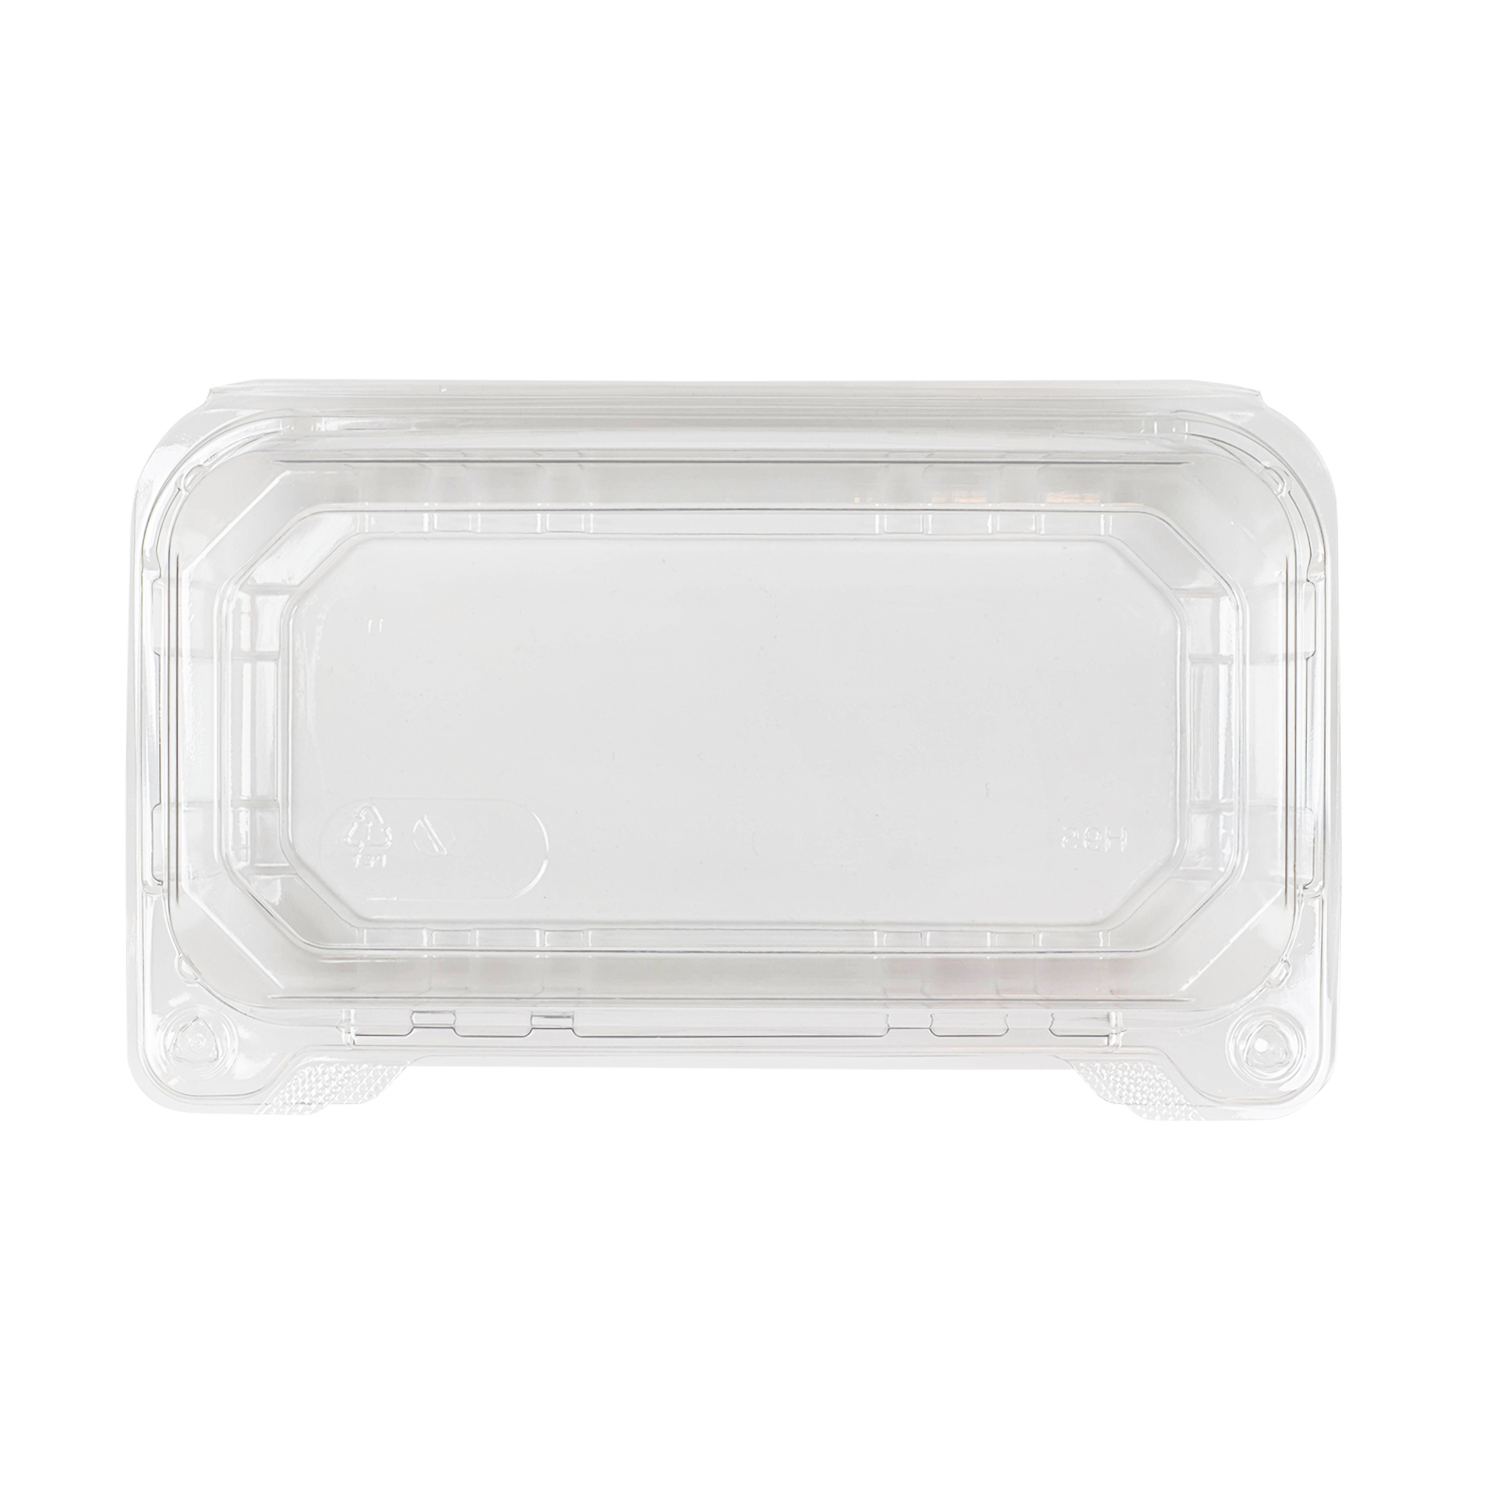 9x5 Hinged Containers - Half Clamshell Takeout Boxes - Karat PET